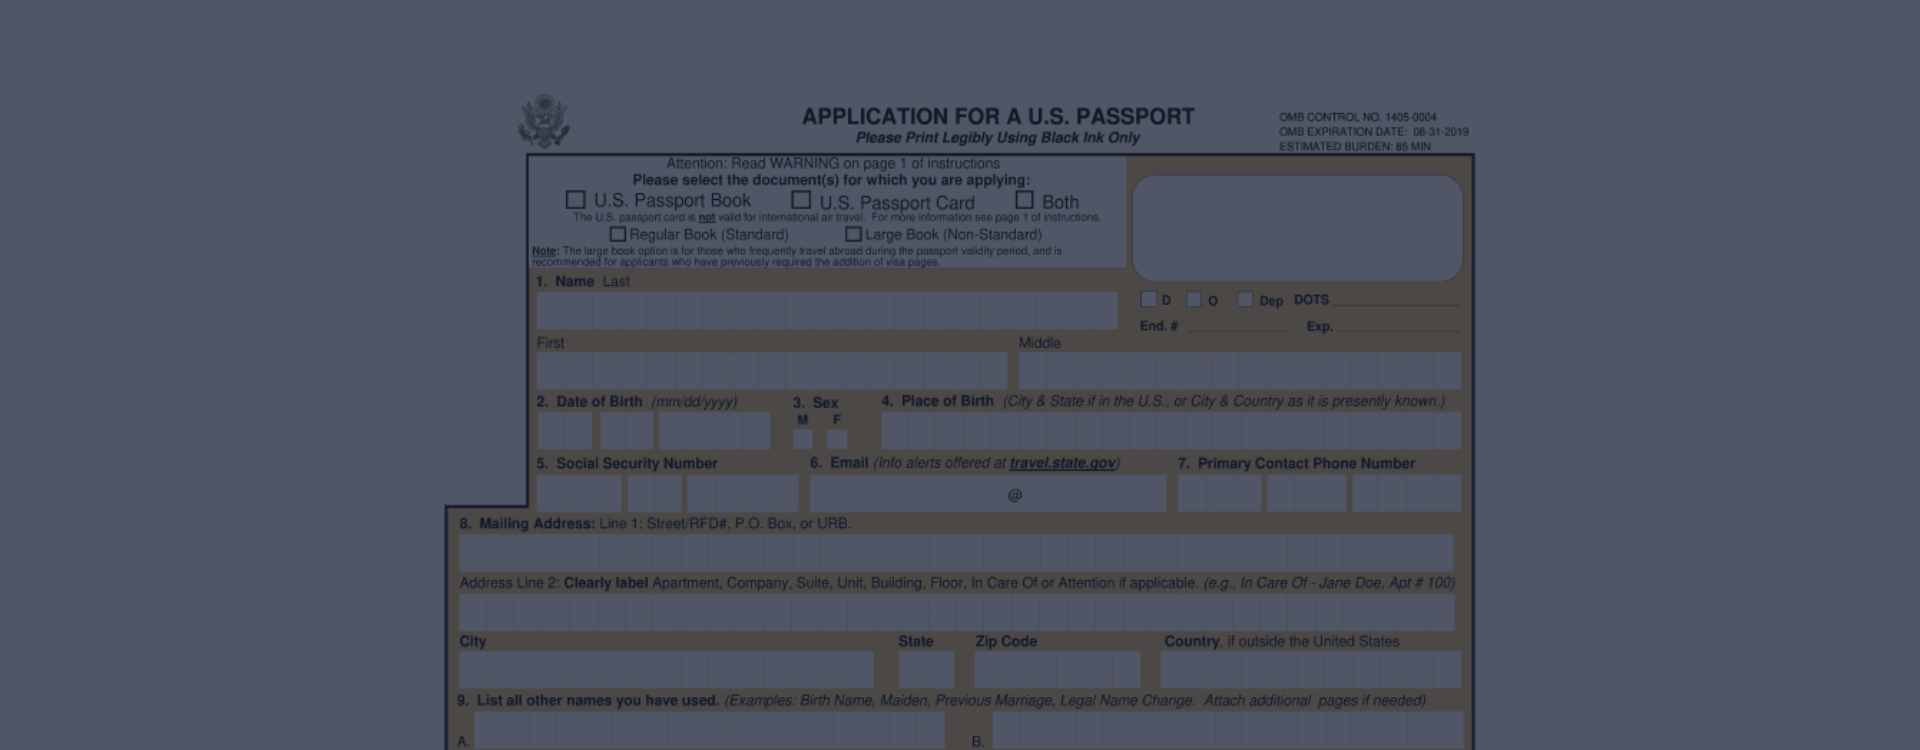 Ds 11 Form Printable Ds 11 Us Passport Application In Pdf Print Out Or Download Free Sample 3573